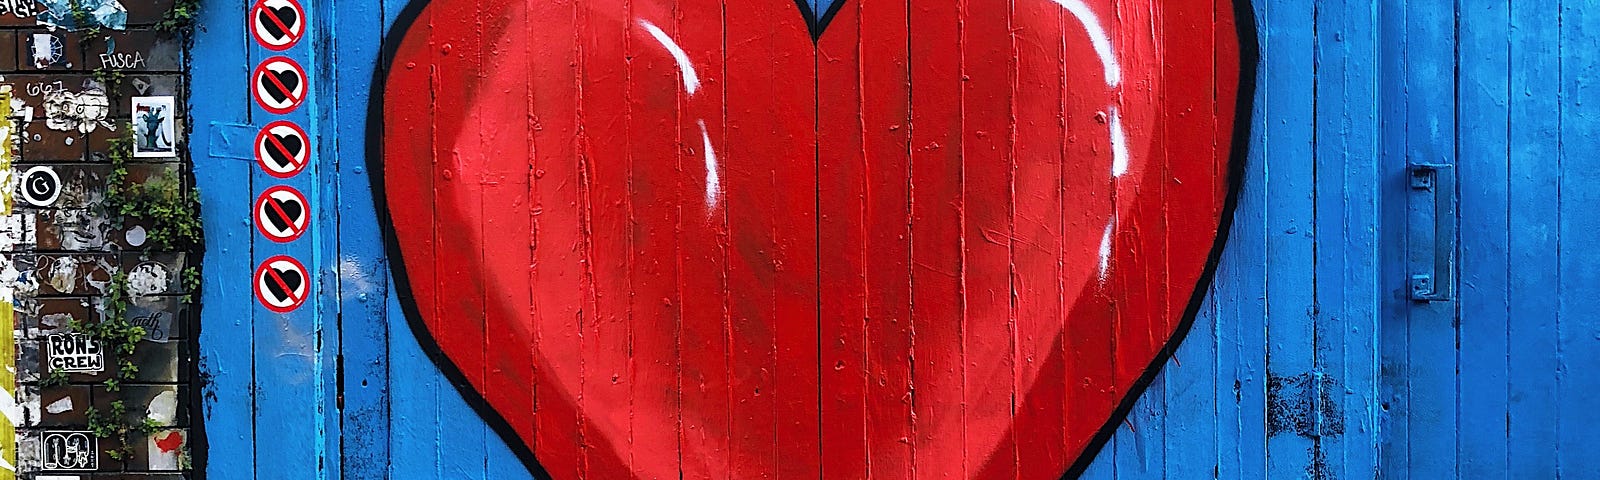 A large heart painted on a pair of old wooden doors.